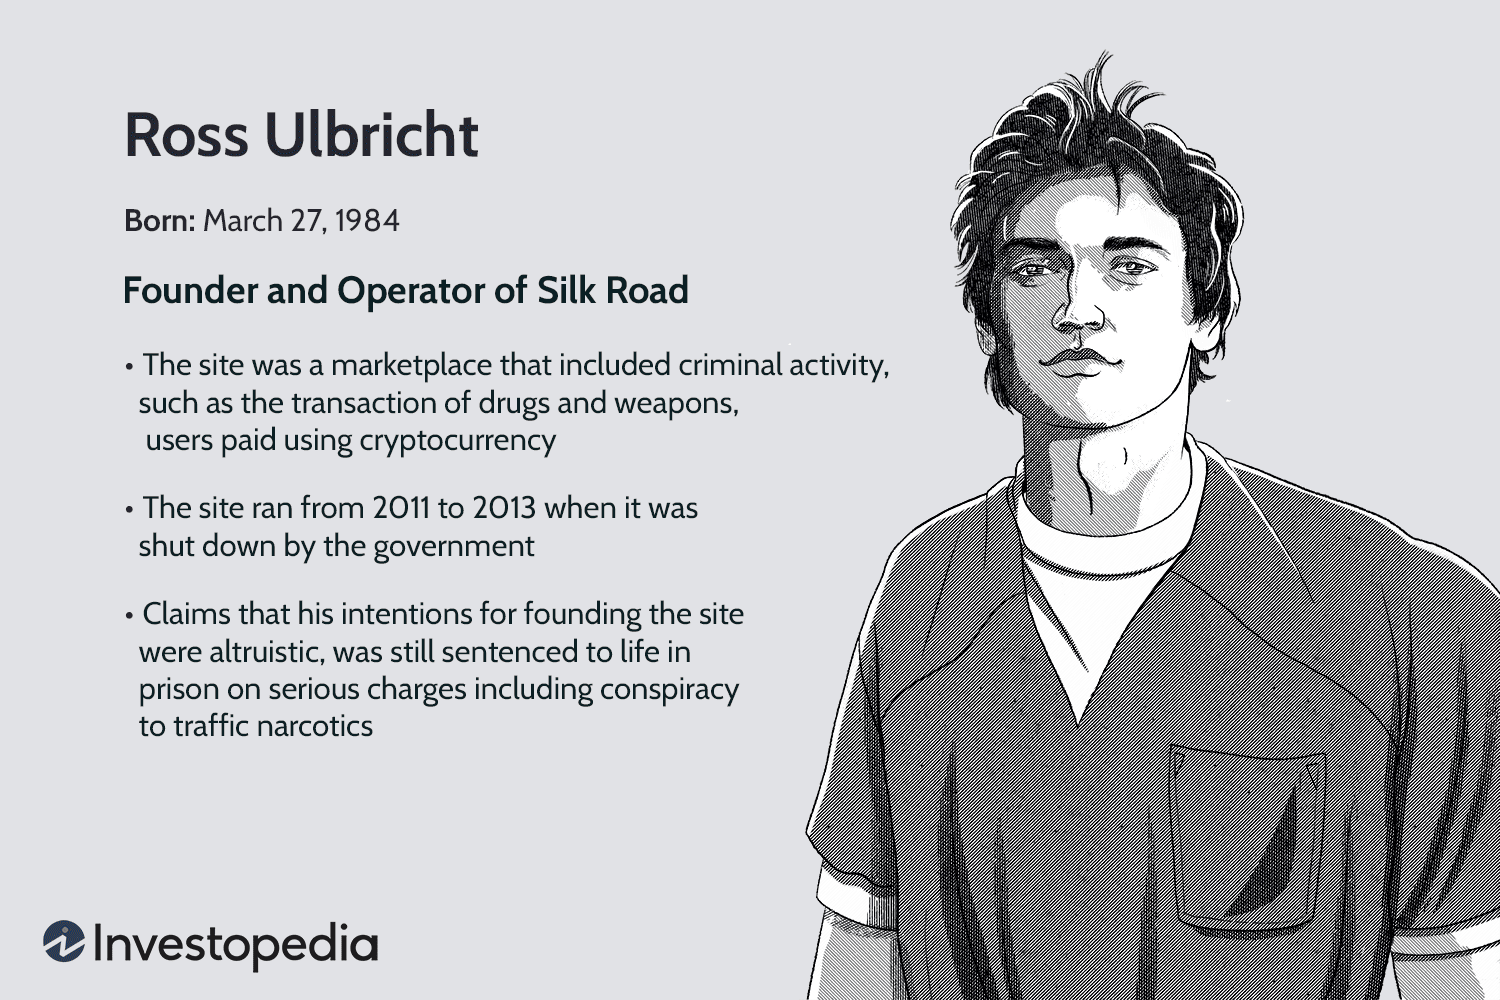 How much Bitcoin did Ross Ulbricht have?